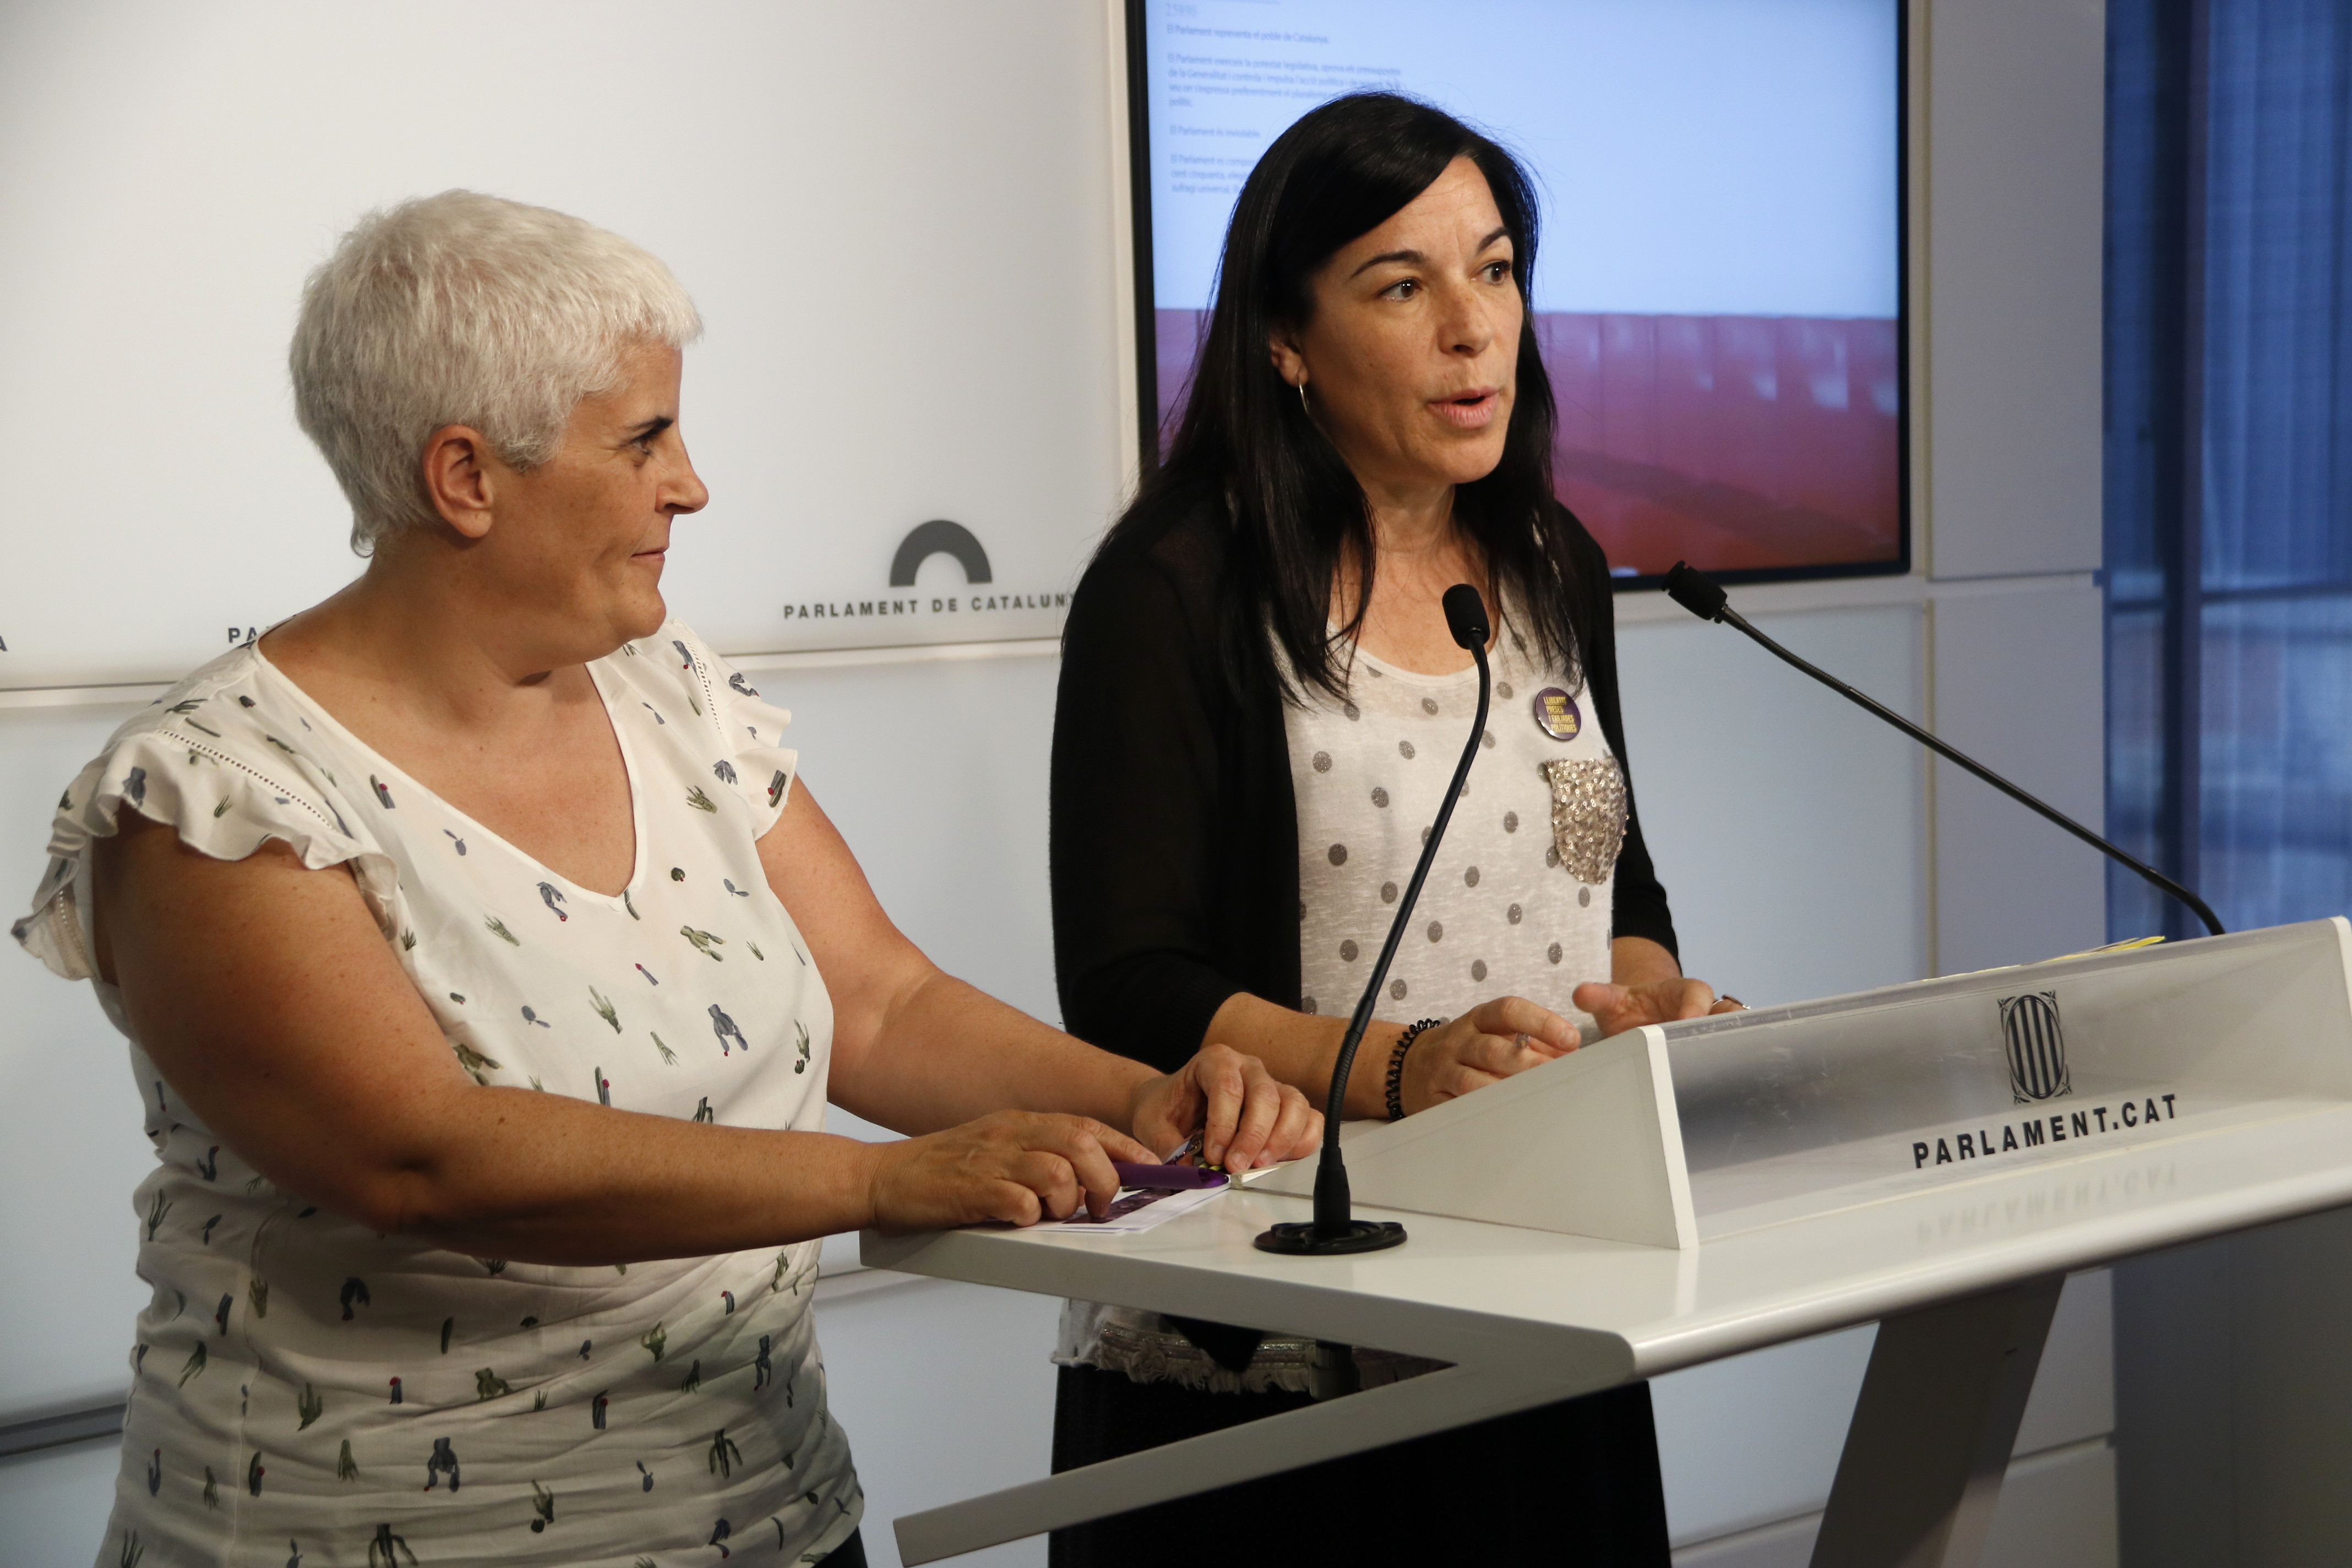 Catalan MP Adriana Delgado and vice president of National Council of Women of Catalonia, Montse Pineda, at a press conference on June 27, 2019 (Guillem Roset/ACN)